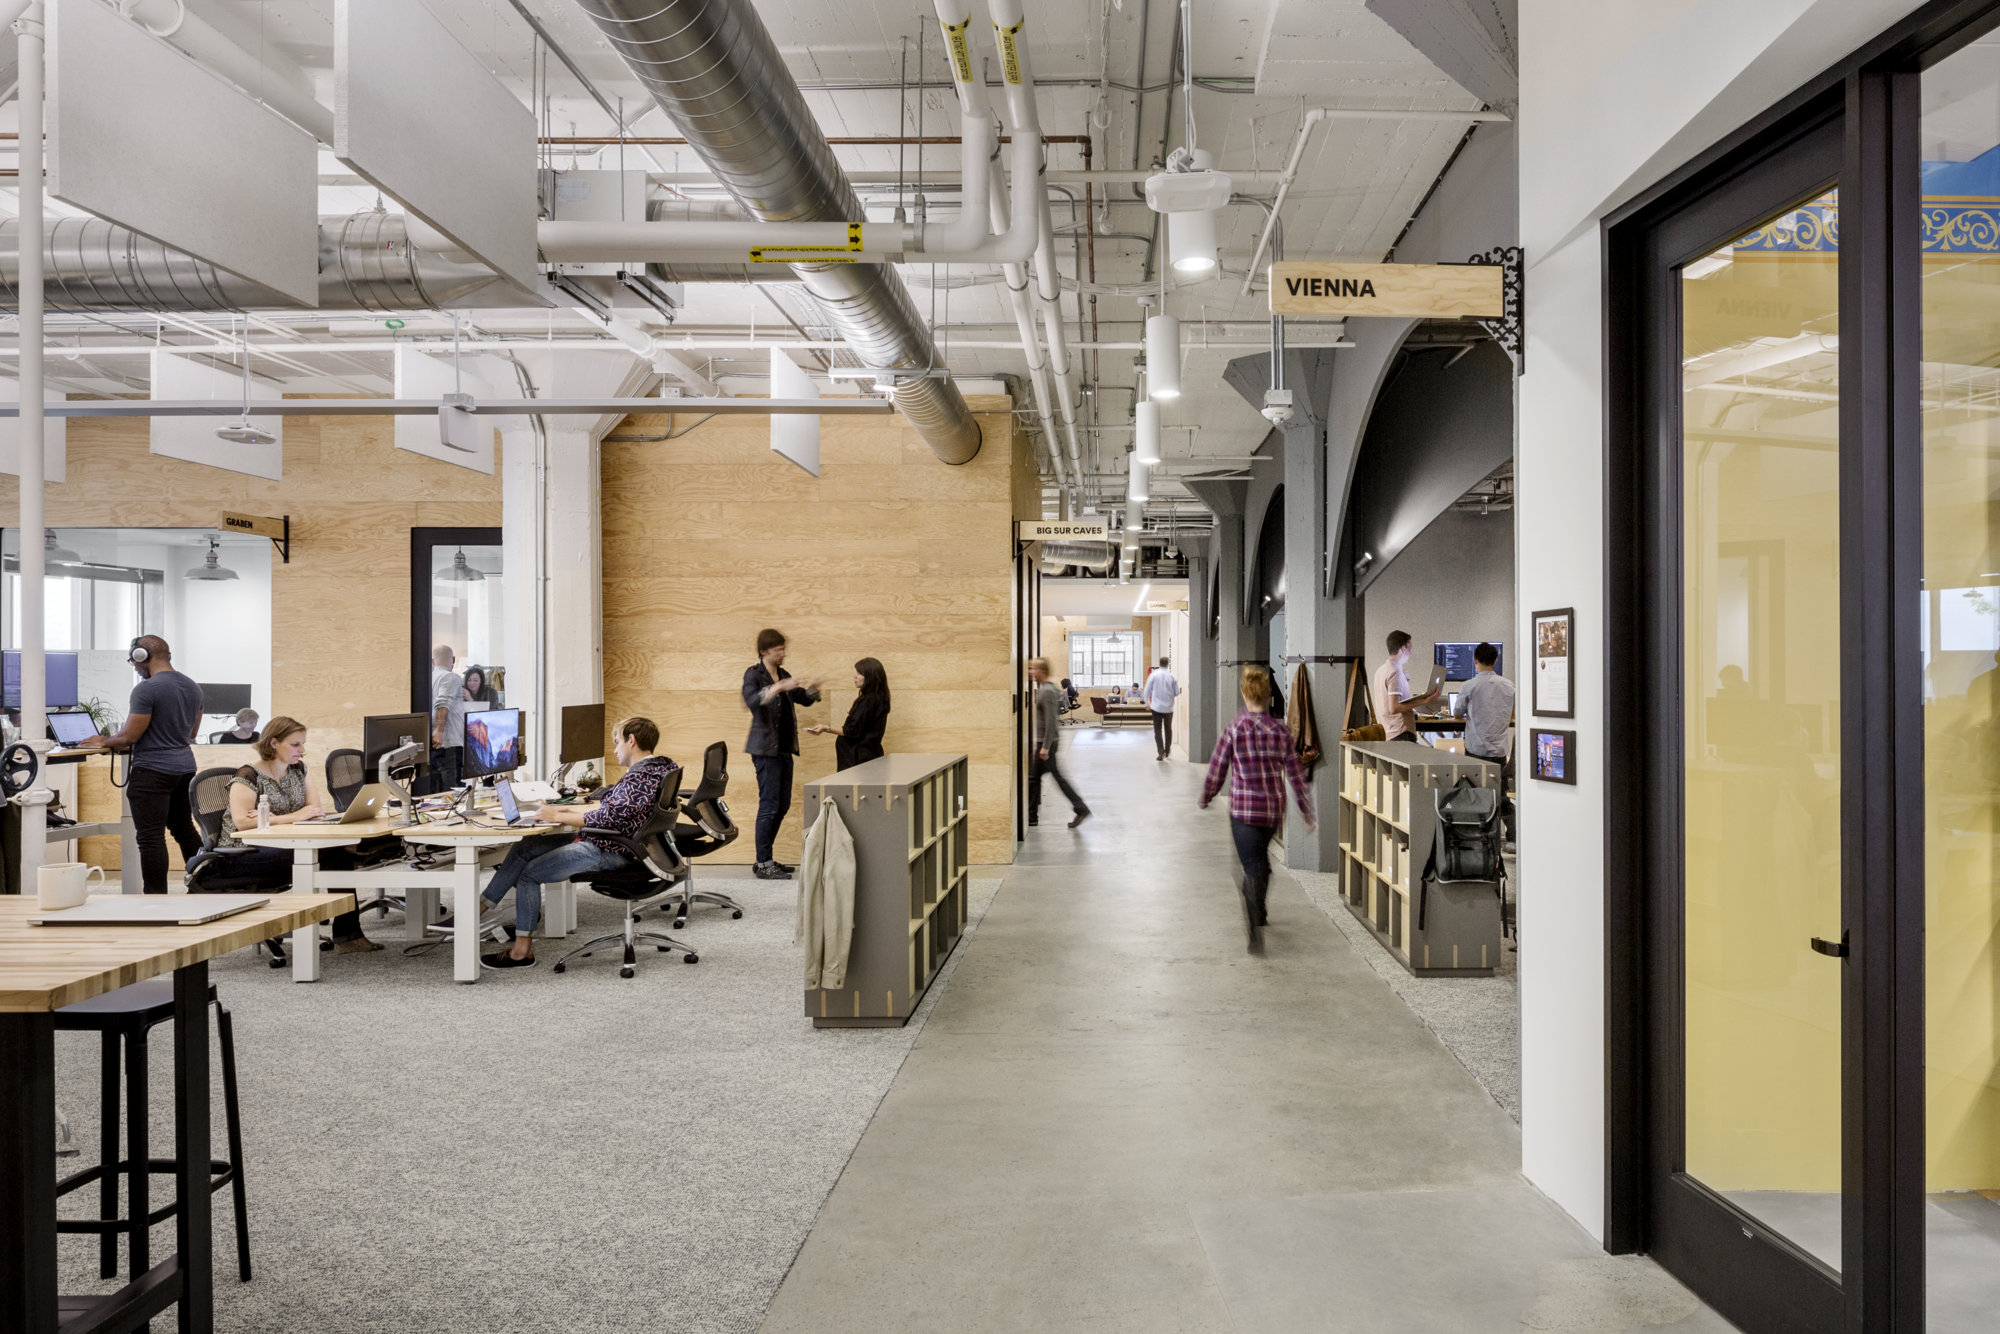 Airbnb Renovates Its 650 Townsend Office with Functionality and Fun in Mind